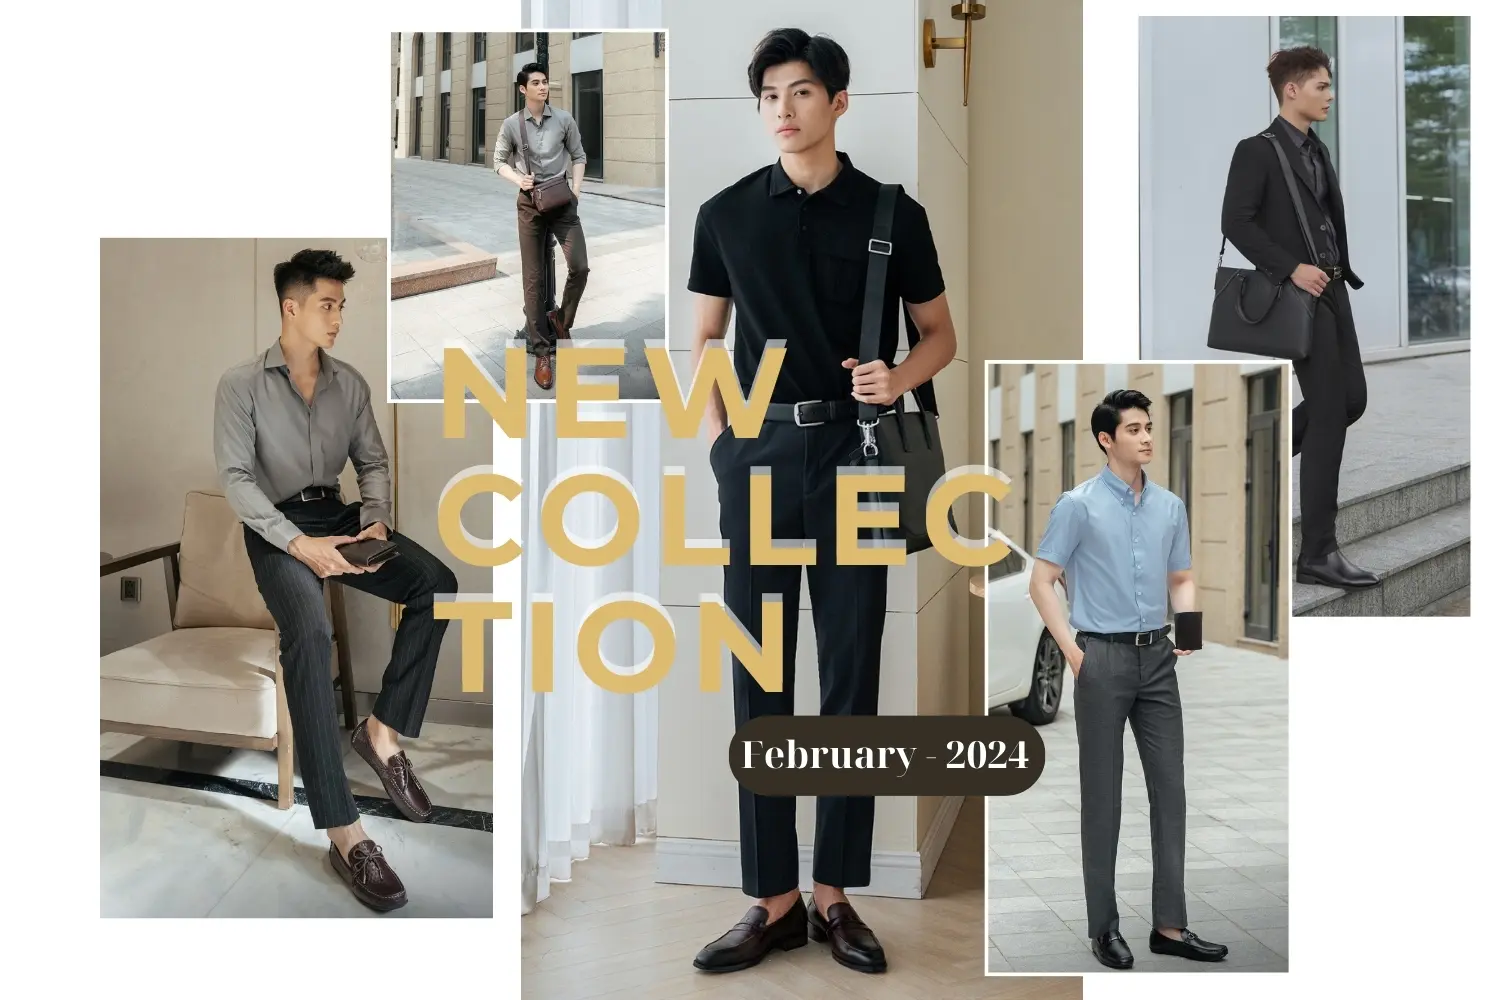 tâm anh collection february 2024